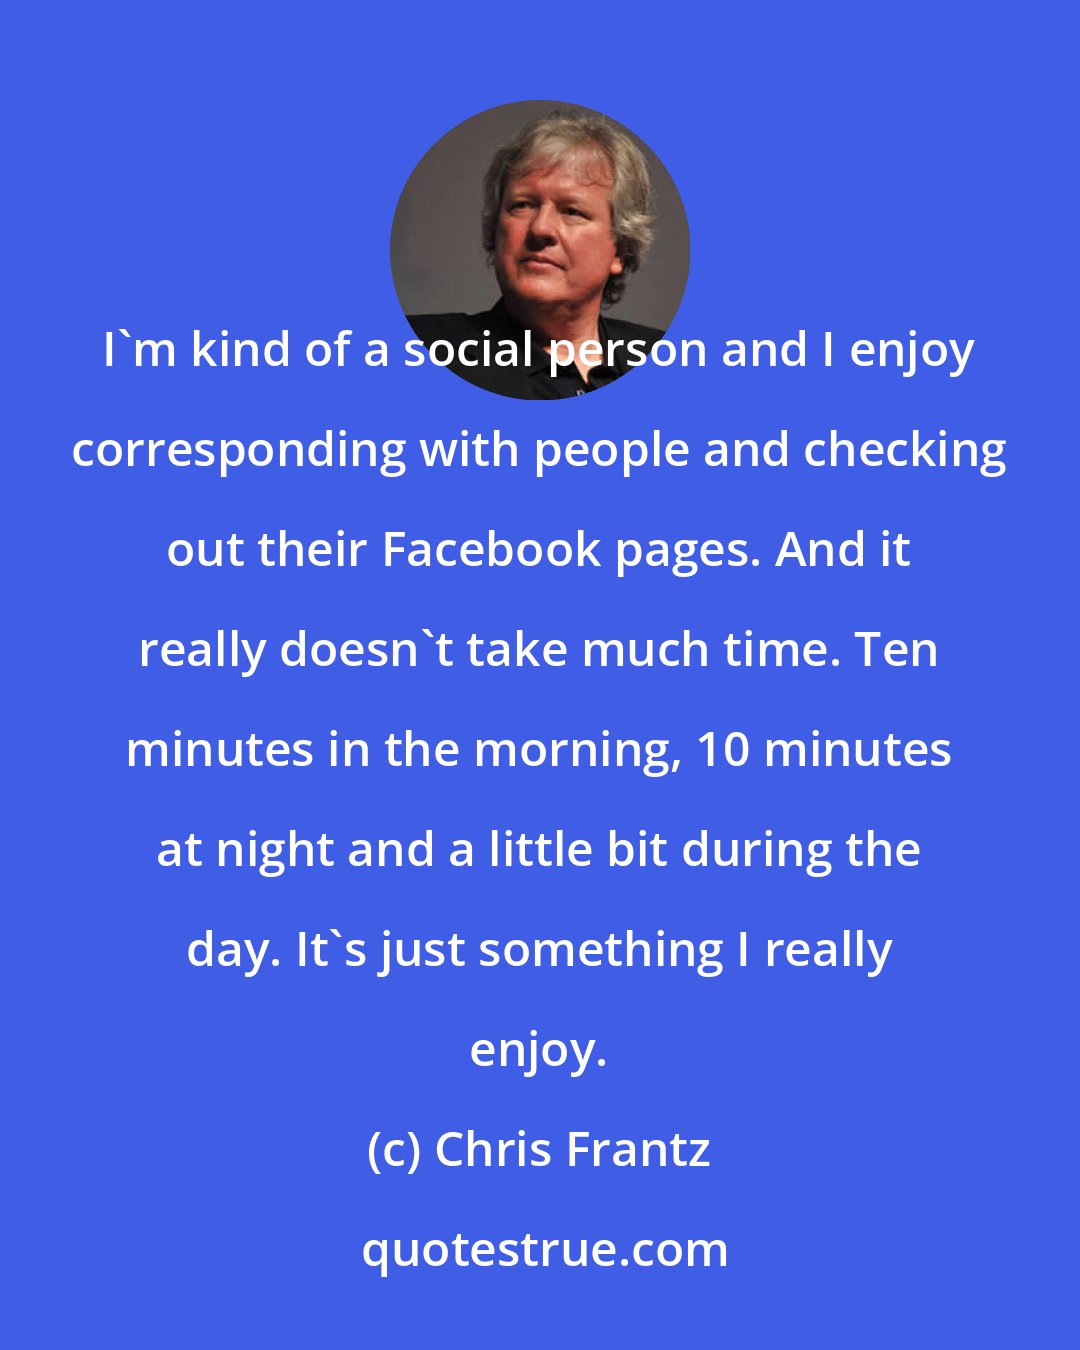 Chris Frantz: I'm kind of a social person and I enjoy corresponding with people and checking out their Facebook pages. And it really doesn't take much time. Ten minutes in the morning, 10 minutes at night and a little bit during the day. It's just something I really enjoy.